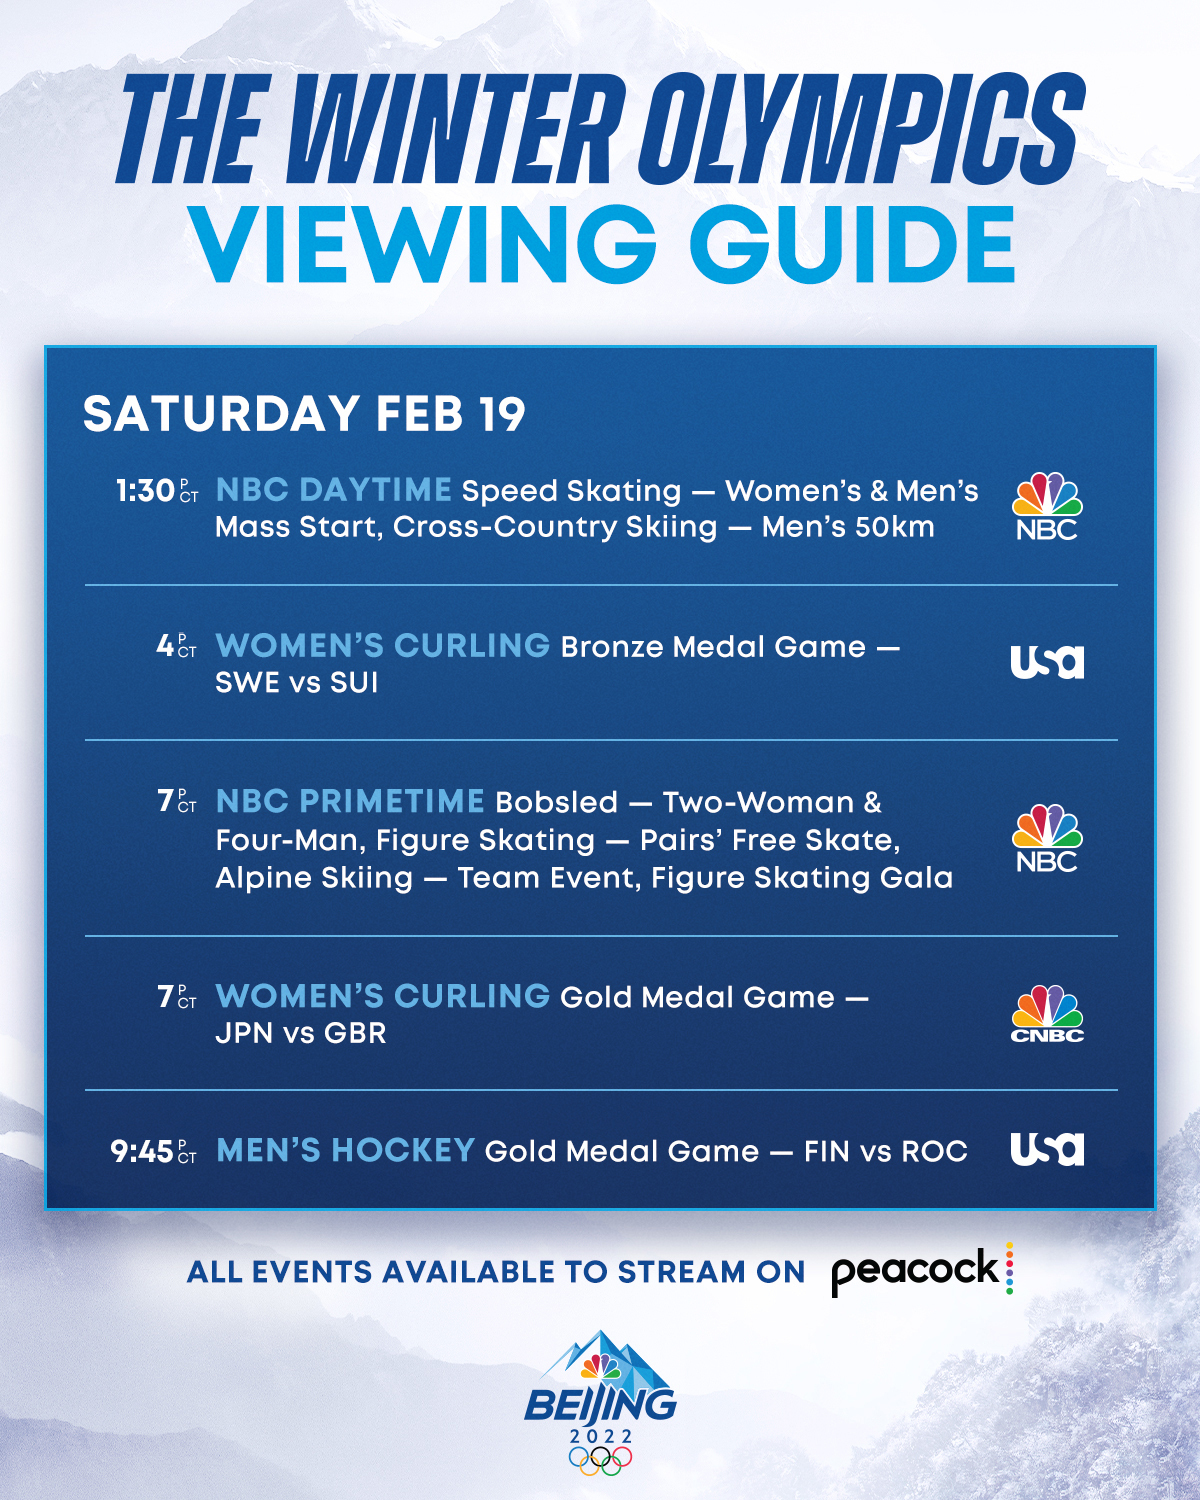 Miss Watching the Figure Skating Pairs Final? Heres How to Watch it Again 